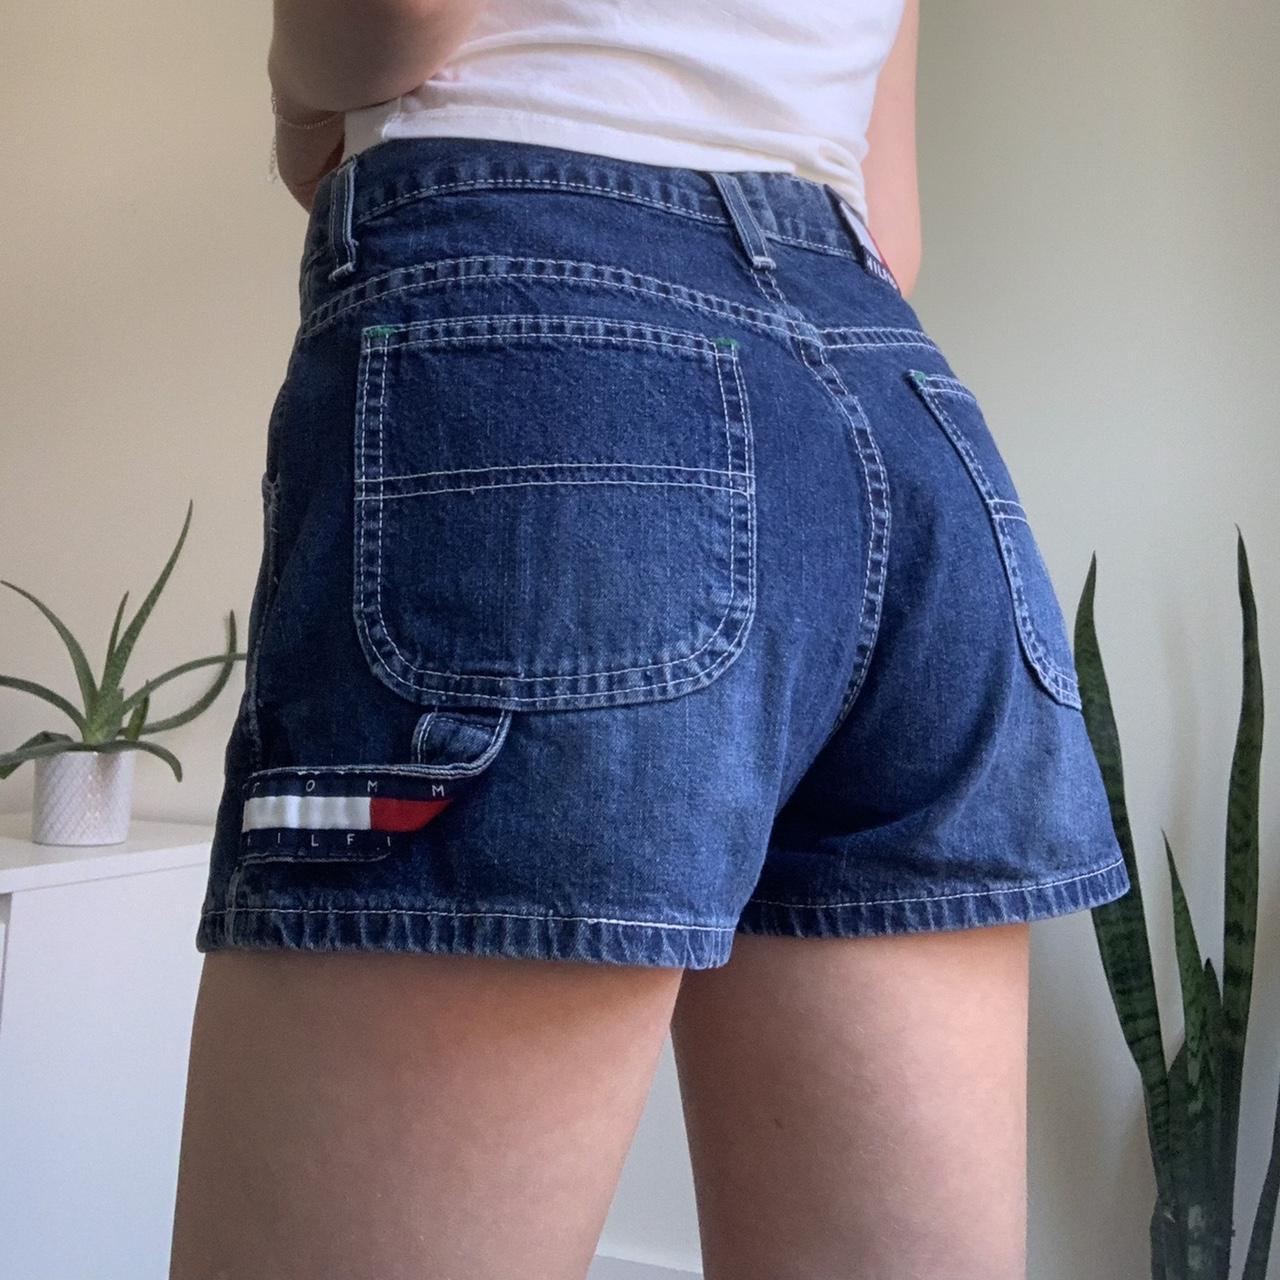 Tommy Hilfiger Women's Blue and Navy Shorts | Depop